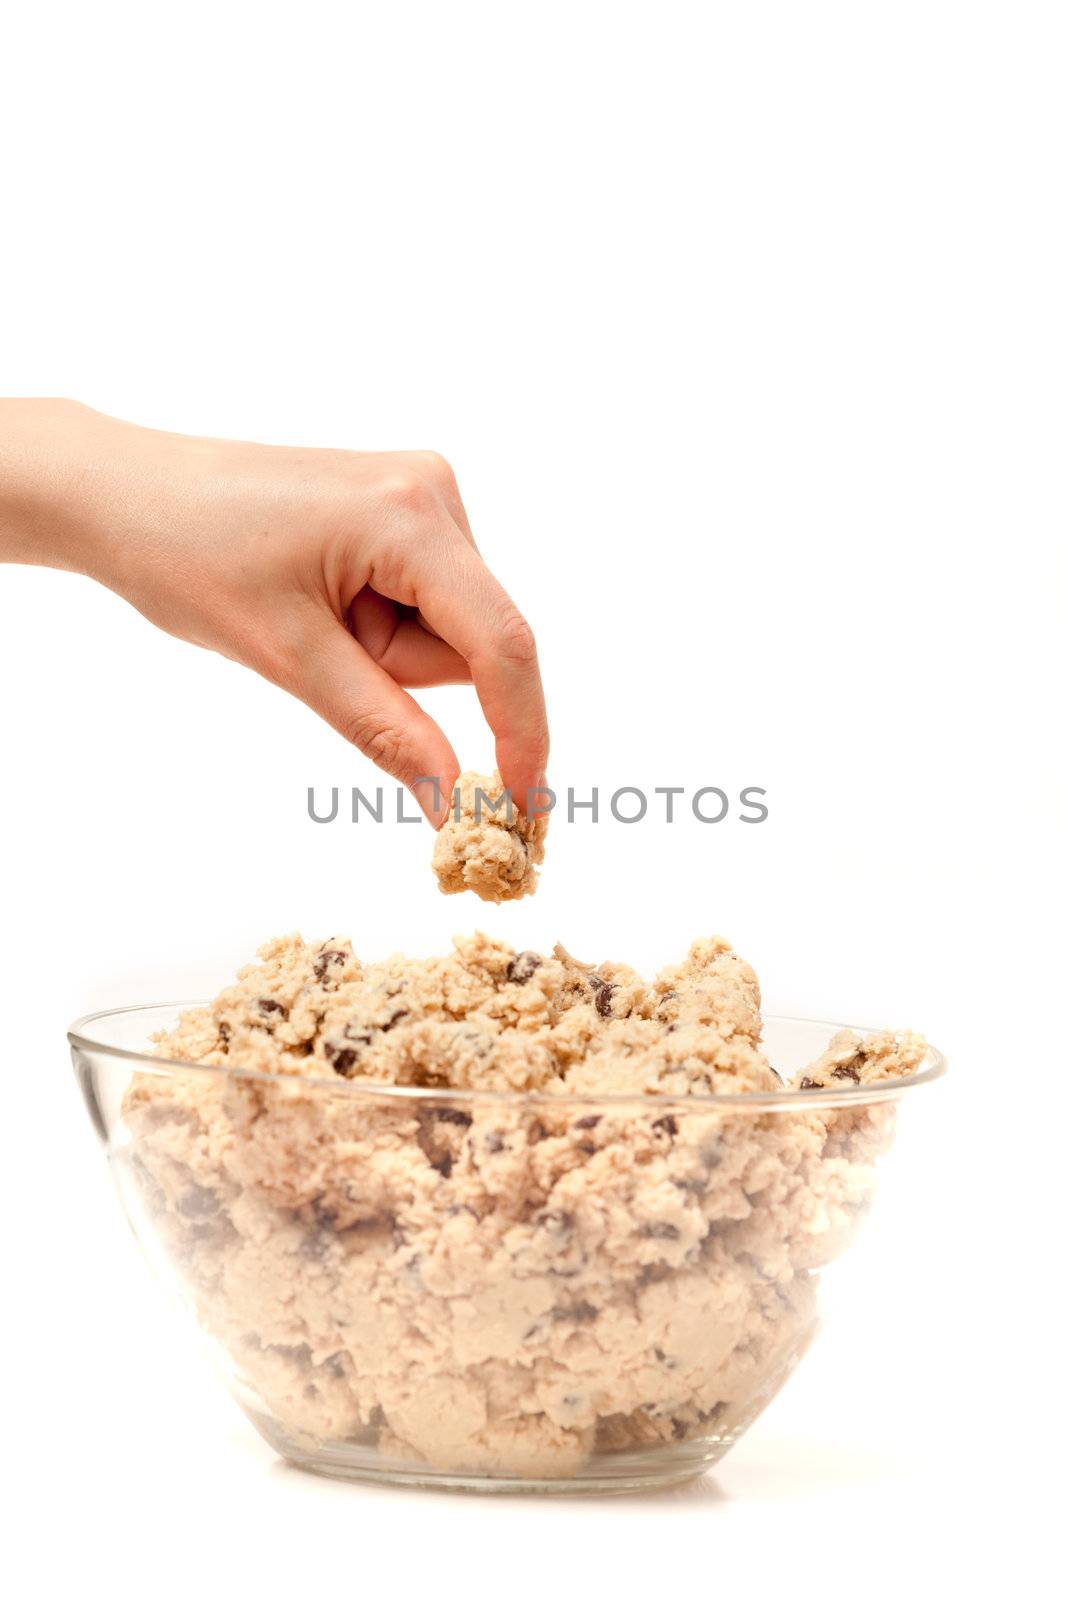 A hand sneaking a taste test of cookie dough.